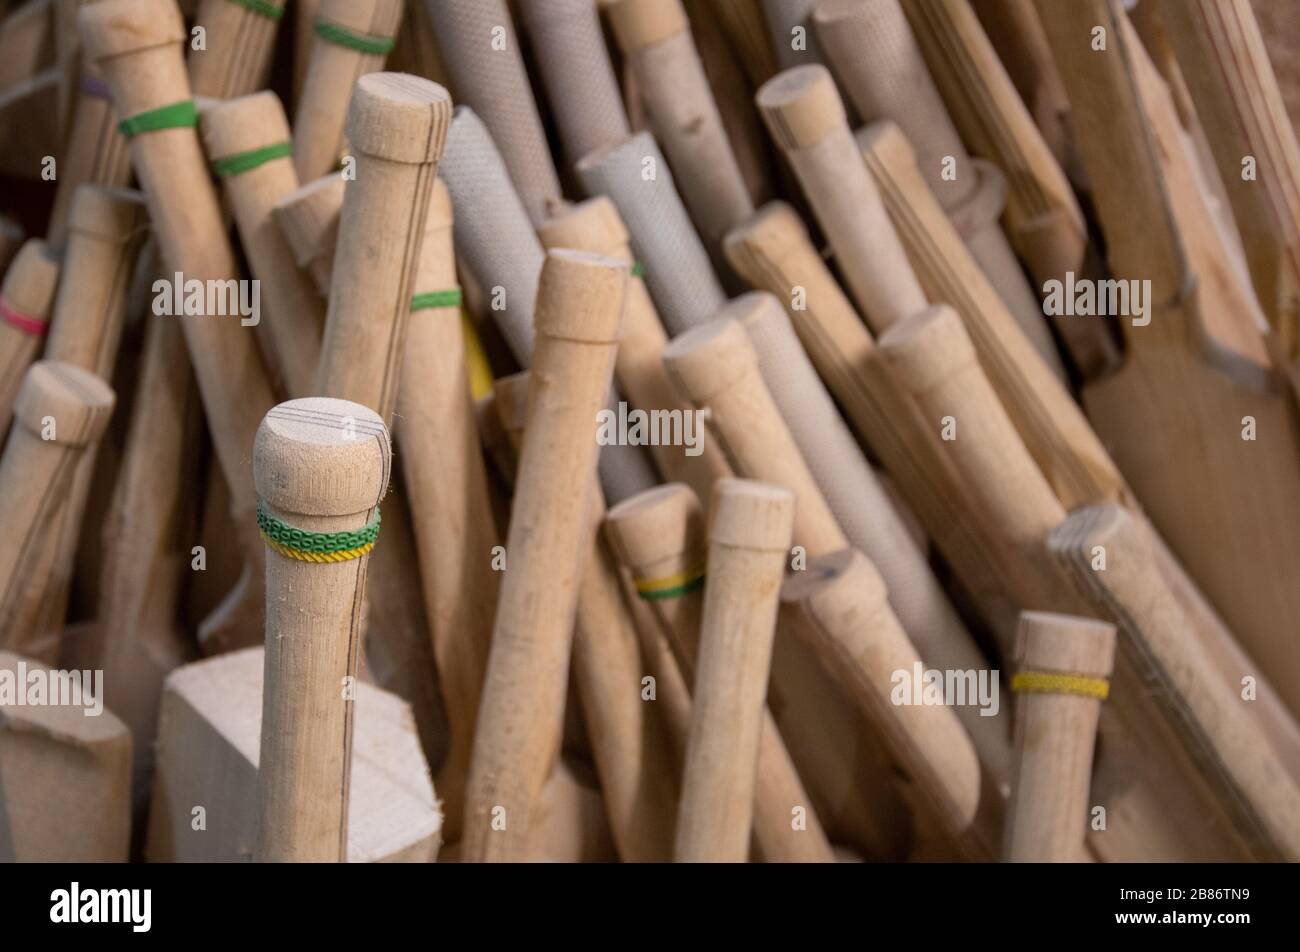 Handmade cricket bats at a workshop at Warsop Stebbing in East Hanningfield, Essex. With the start of the season just weeks away, the ECB, the governing body of cricket have recommend that all forms of recreational cricket are for now suspended. Stock Photo